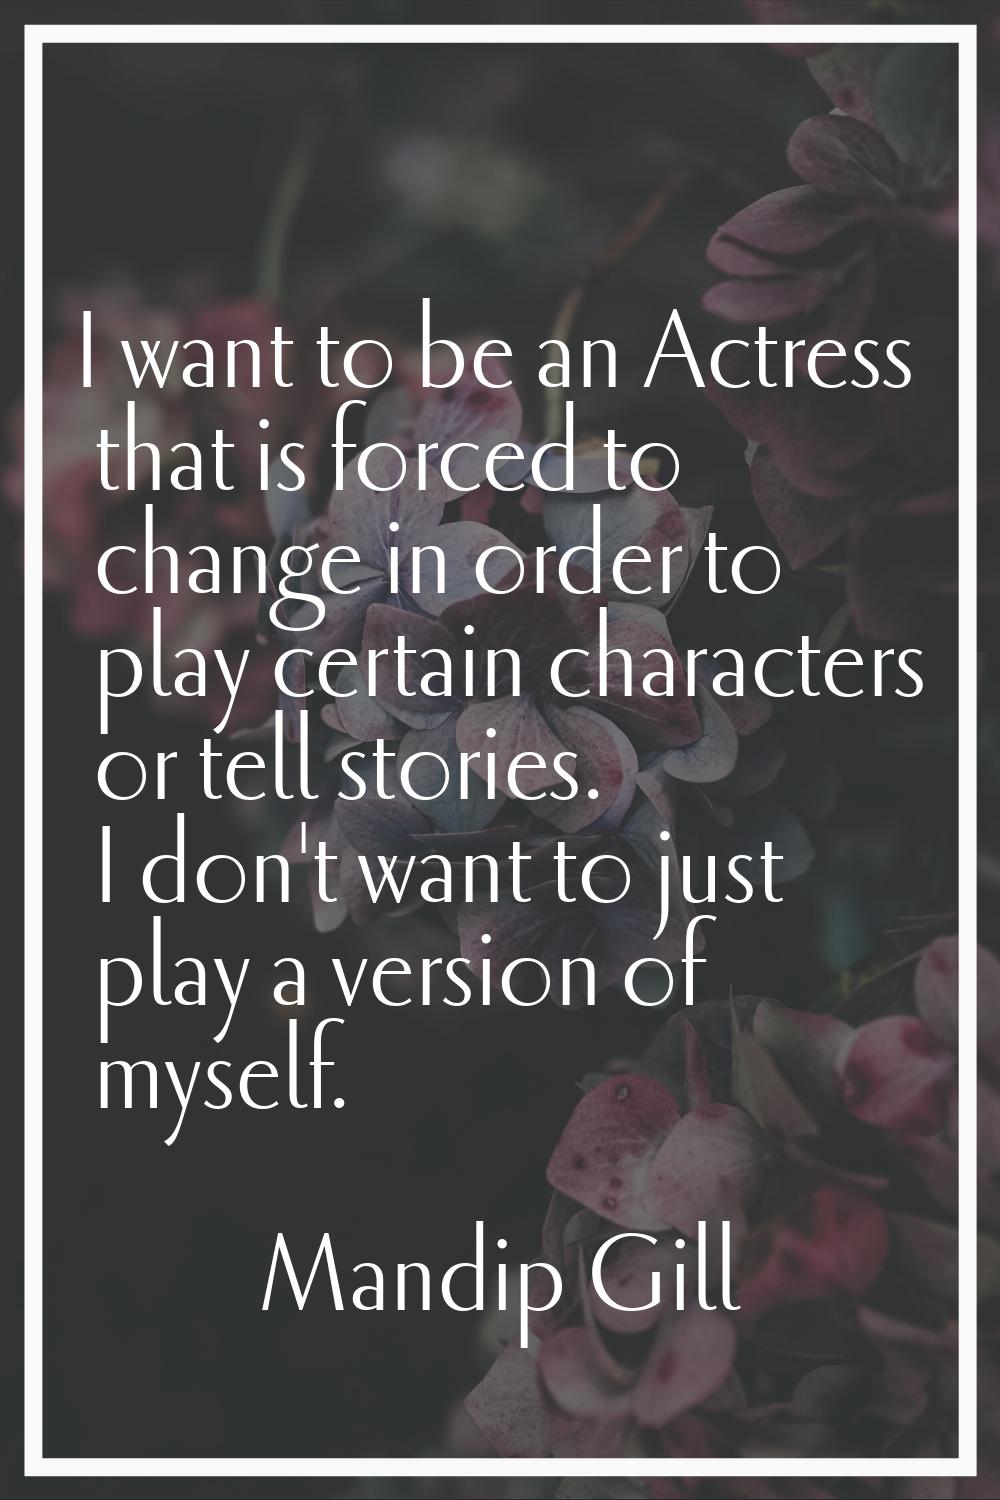 I want to be an Actress that is forced to change in order to play certain characters or tell storie